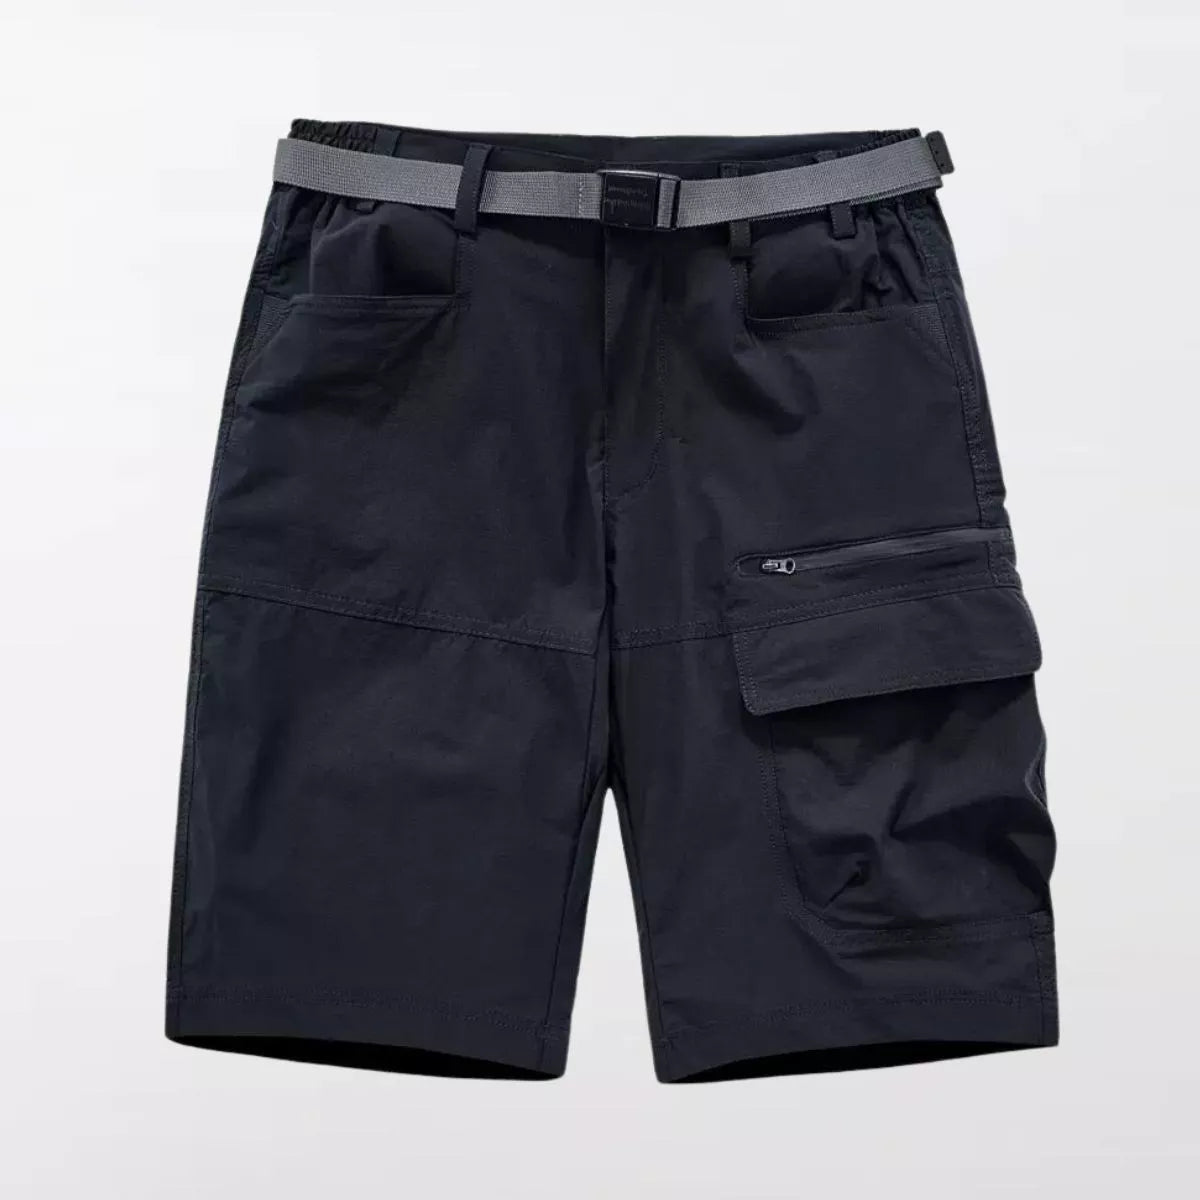 Image Of The S/23 Summer Techwear Shorts. Black Color